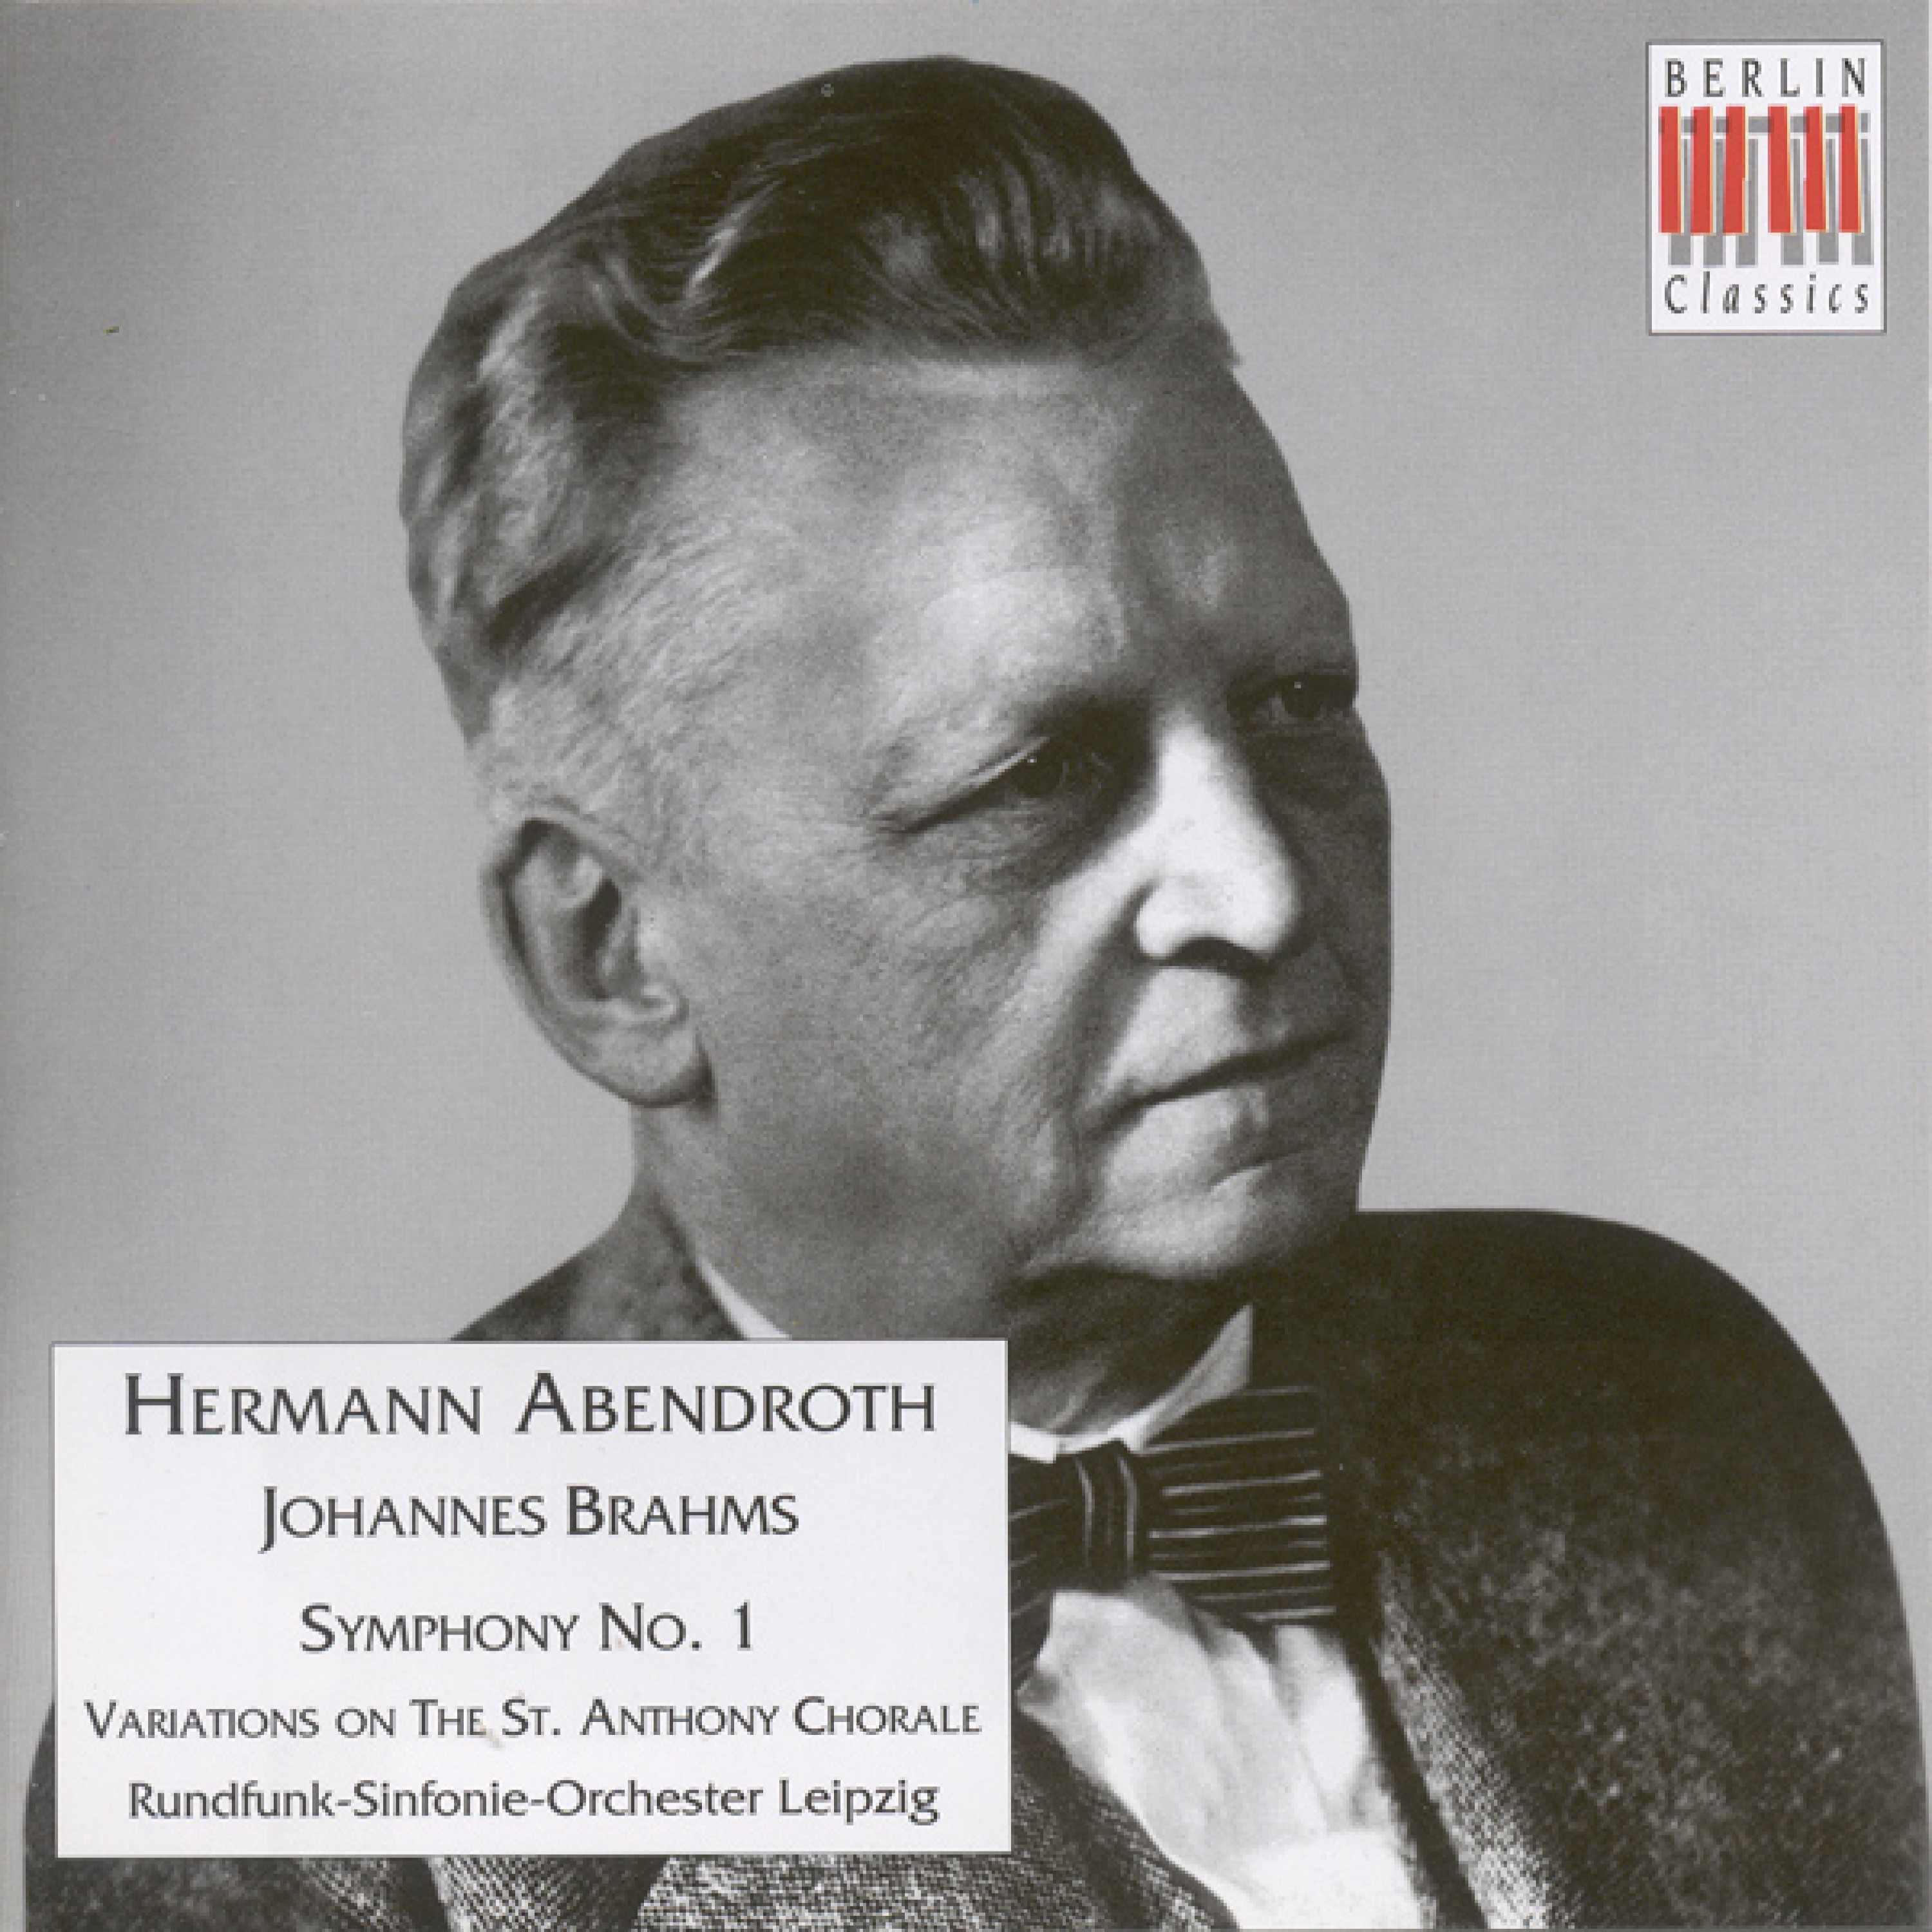 Variations on a Theme by Haydn, Op. 56a, "St. Anthony Variations": Variation 4: Andante